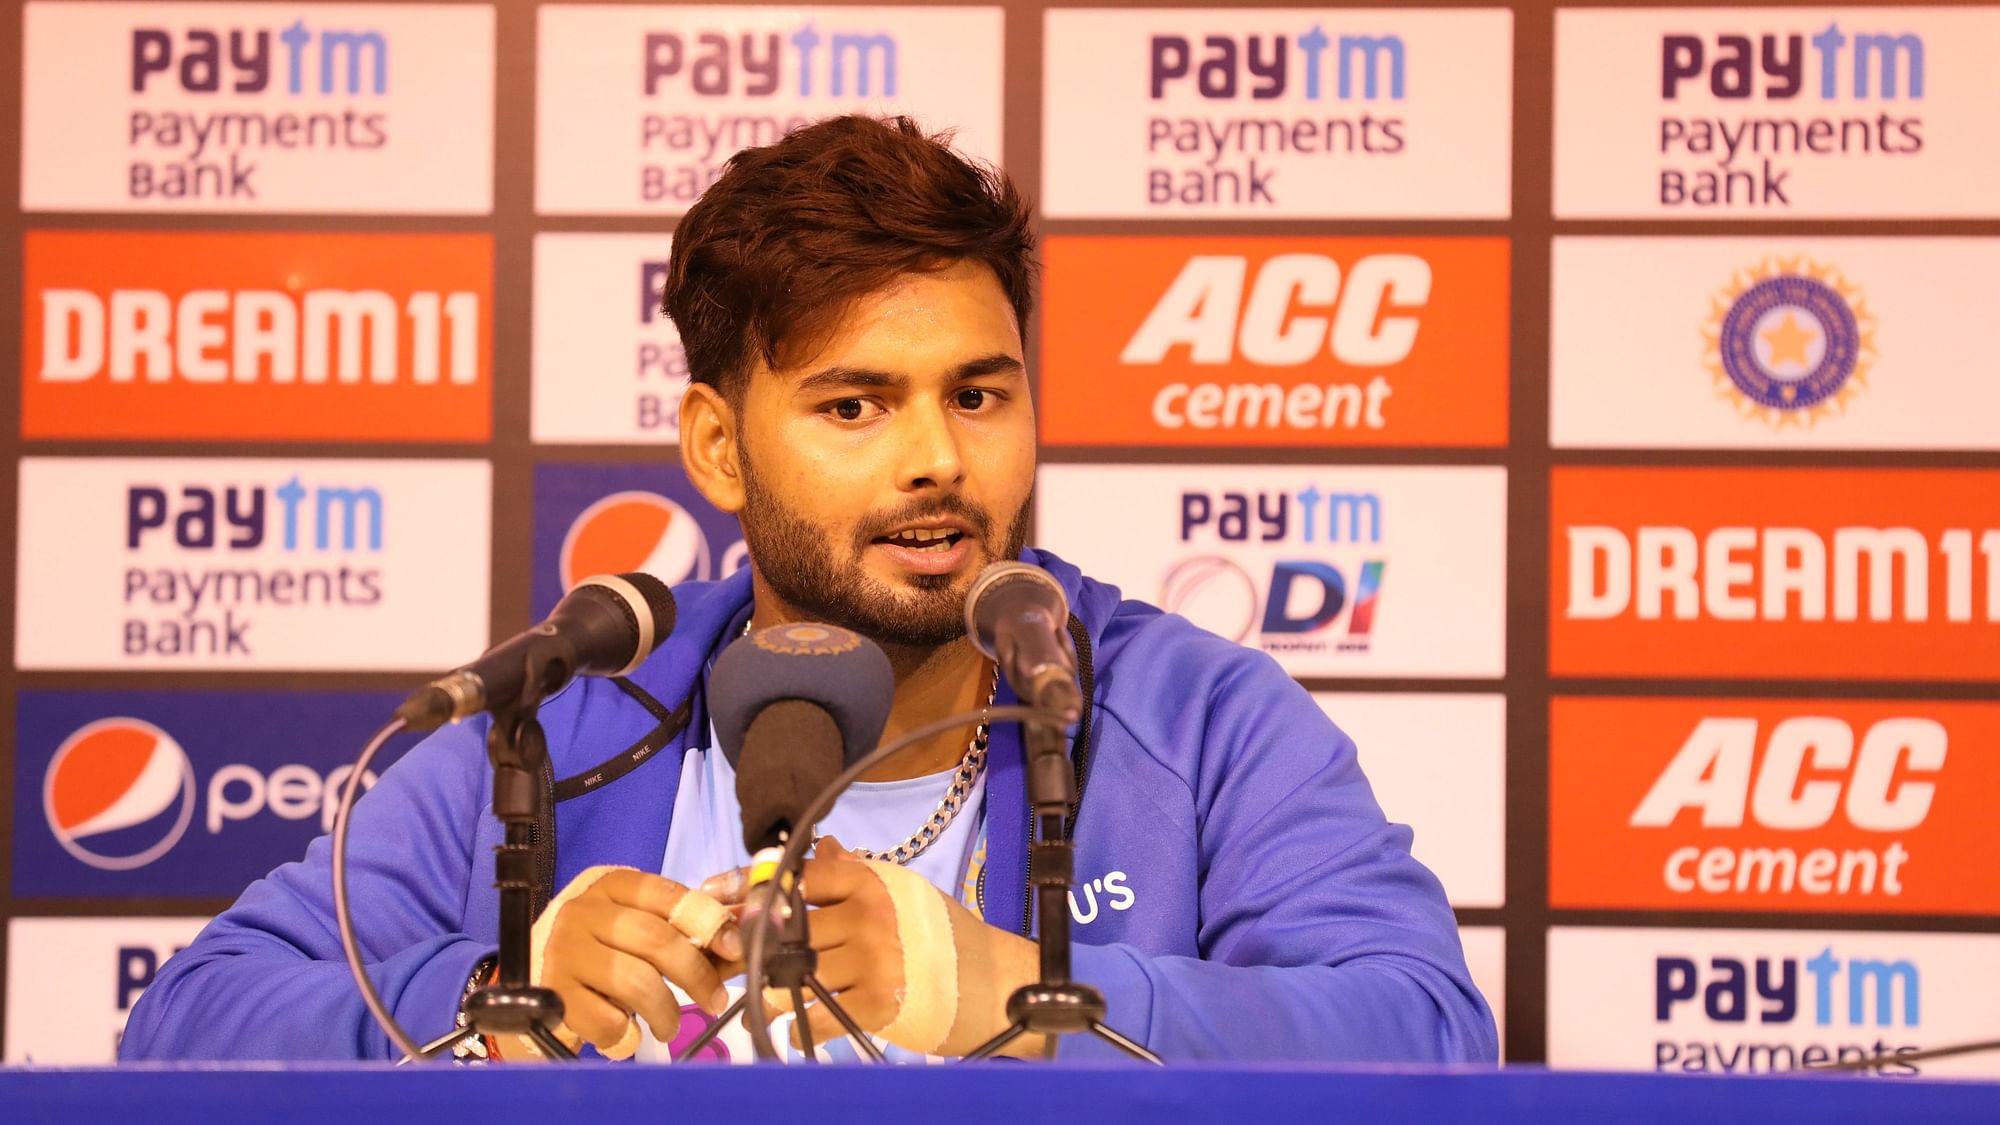 Rishabh Pant says he has now understood that there is no concept of “natural game” in international cricket.